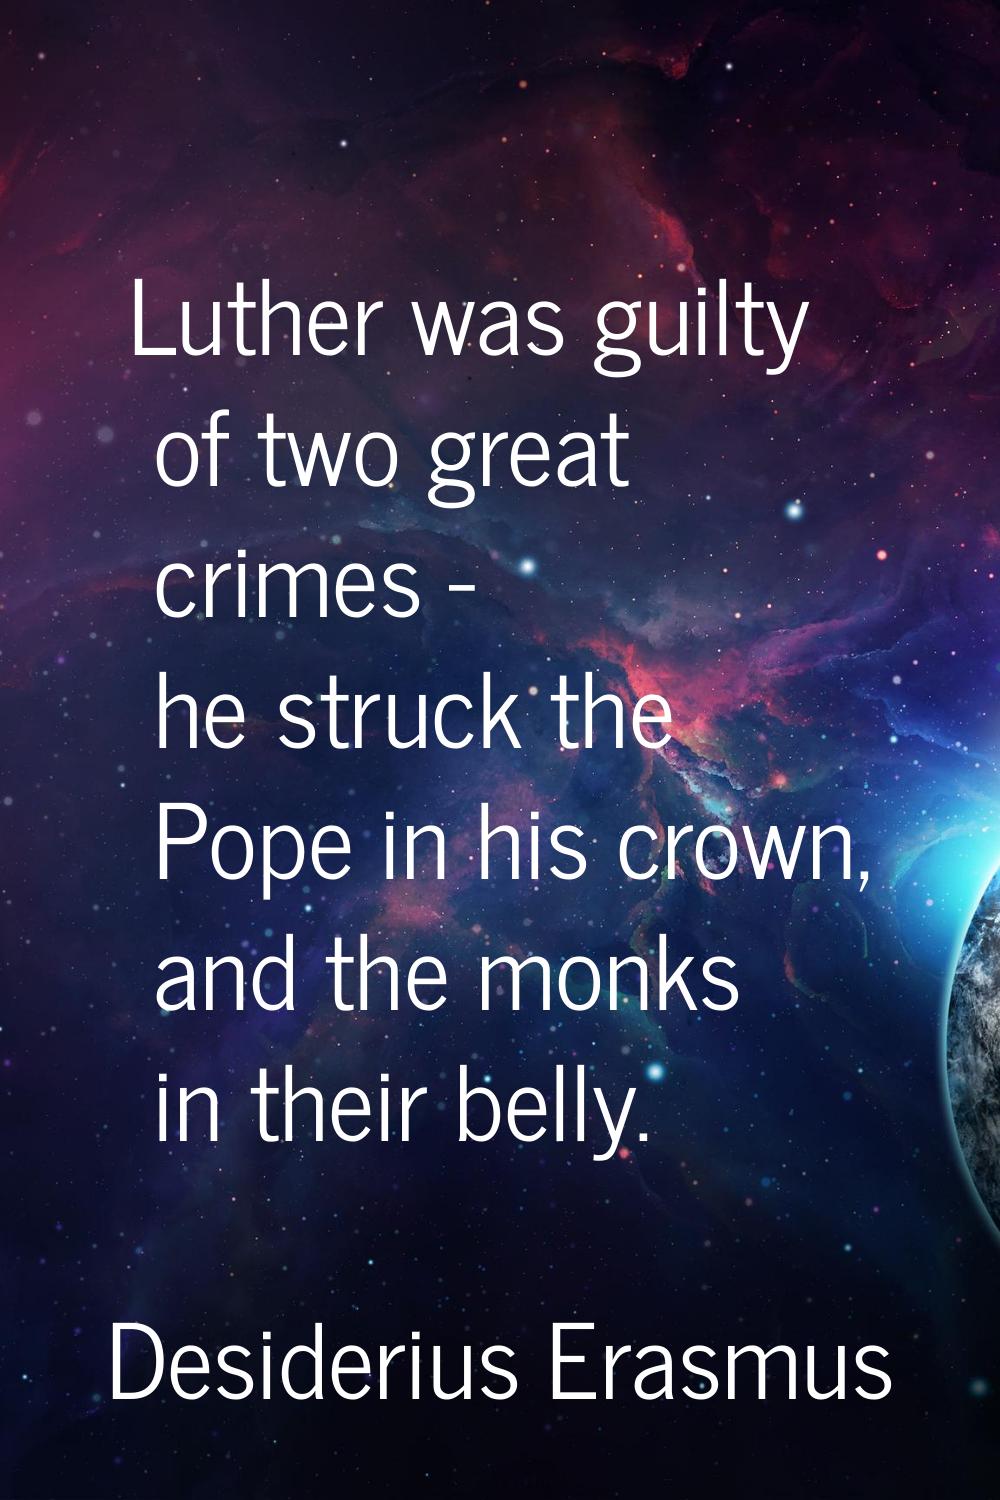 Luther was guilty of two great crimes - he struck the Pope in his crown, and the monks in their bel